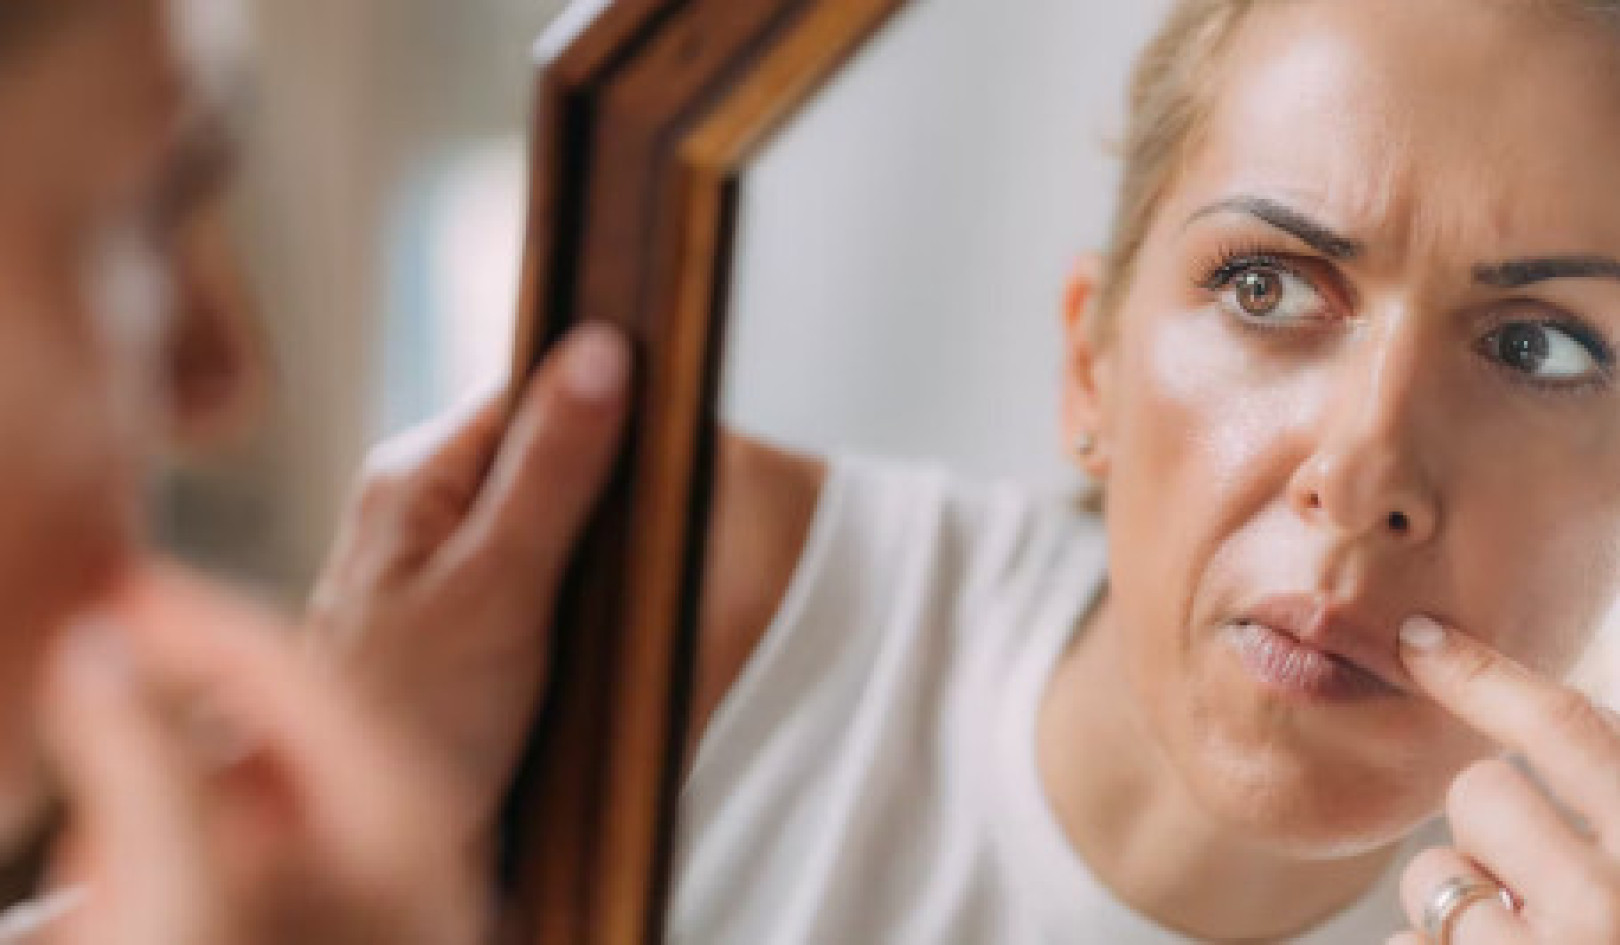 Do You Have Body Dysmorphic Disorder? What is BDD?